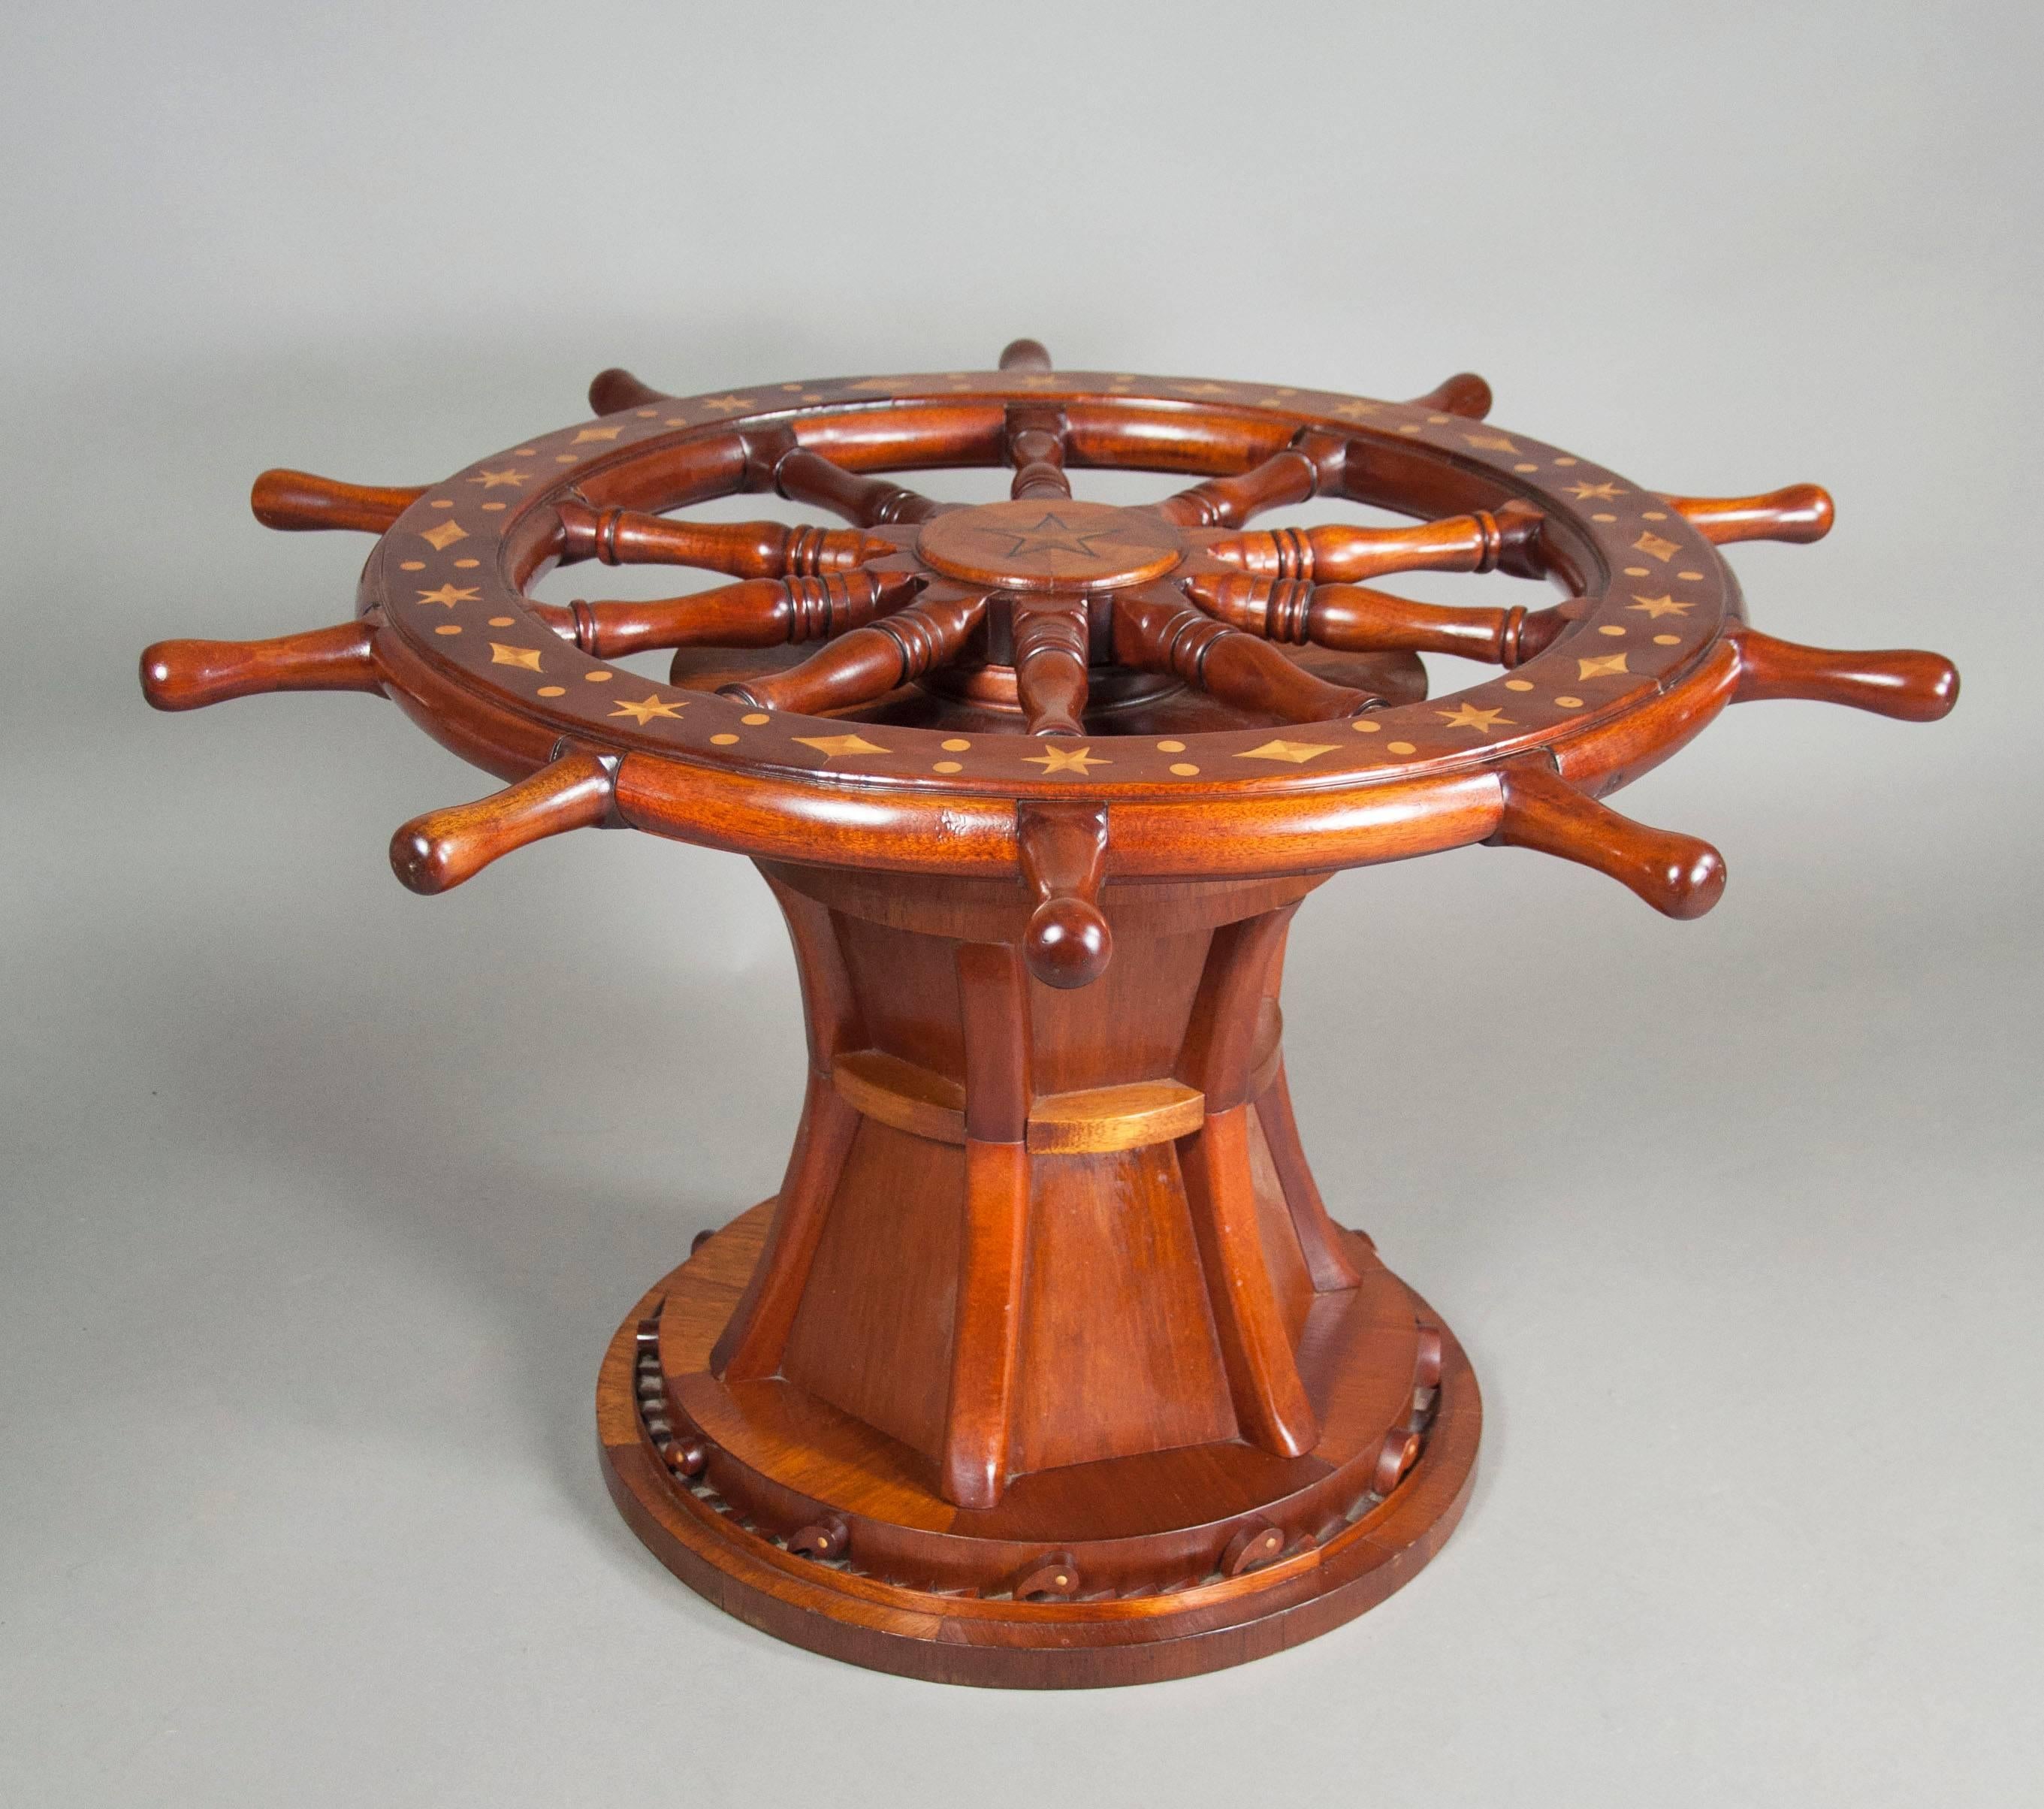 With glass top over an inlaid spoked ships wheel with winch form support and circular base with ratcheted and spring mounted locking tabs.